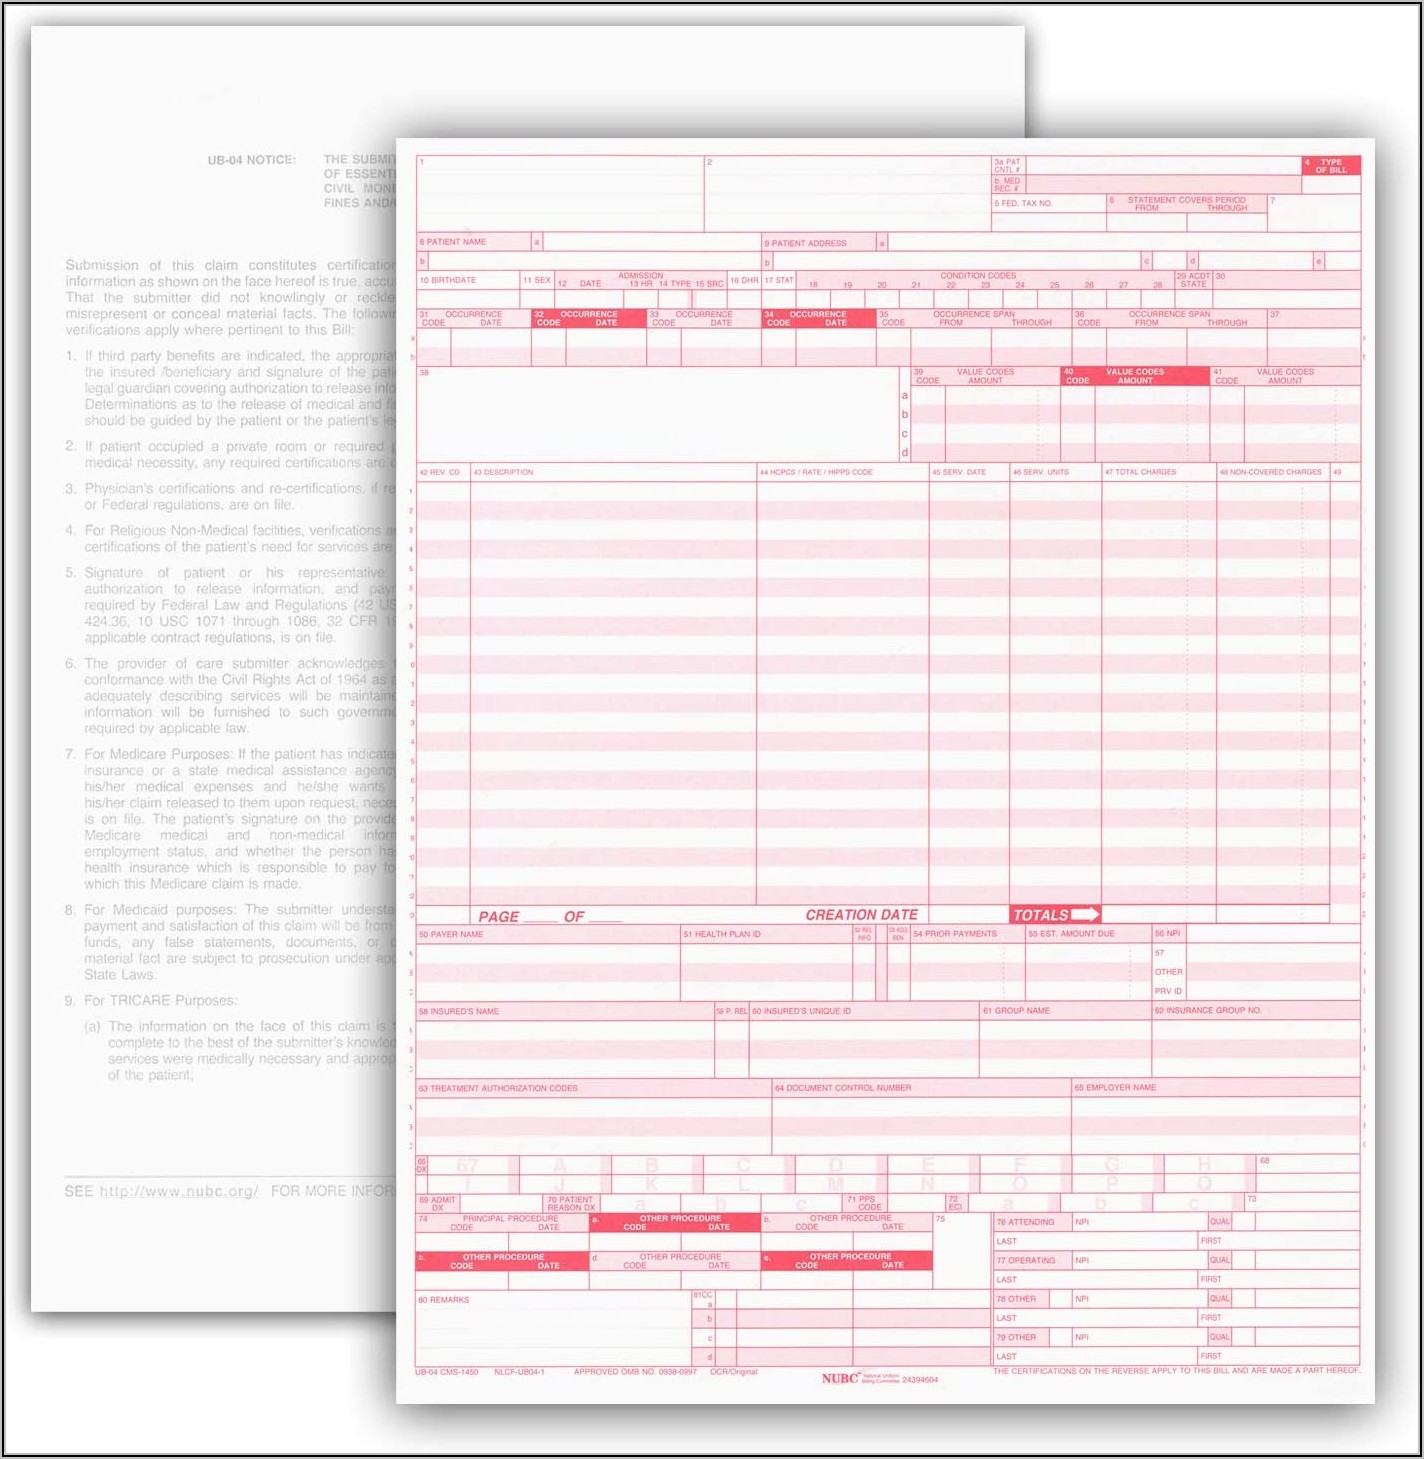 Ub 04 Cms 1450 Paper Claim Form Template 1 Resume Examples A19XBMG0V4